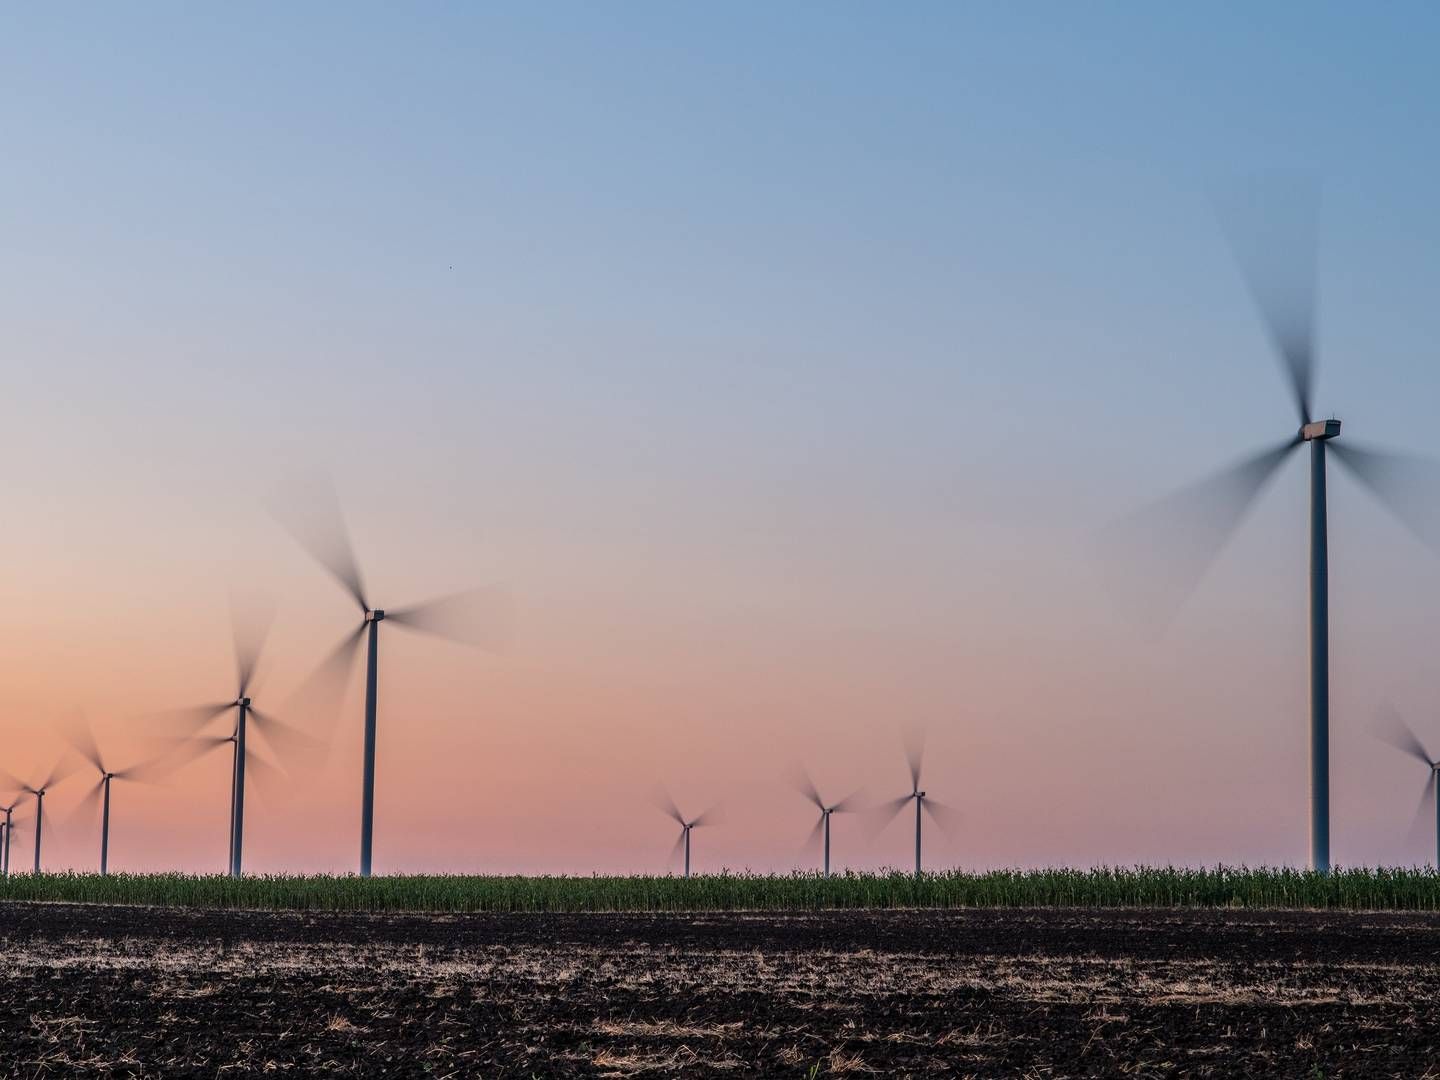 US turbine manufacturer GE has hired a Texan company to recycle 5,000 turbine blades – but GE claims it never happened. | Photo: GE Renewable Energy